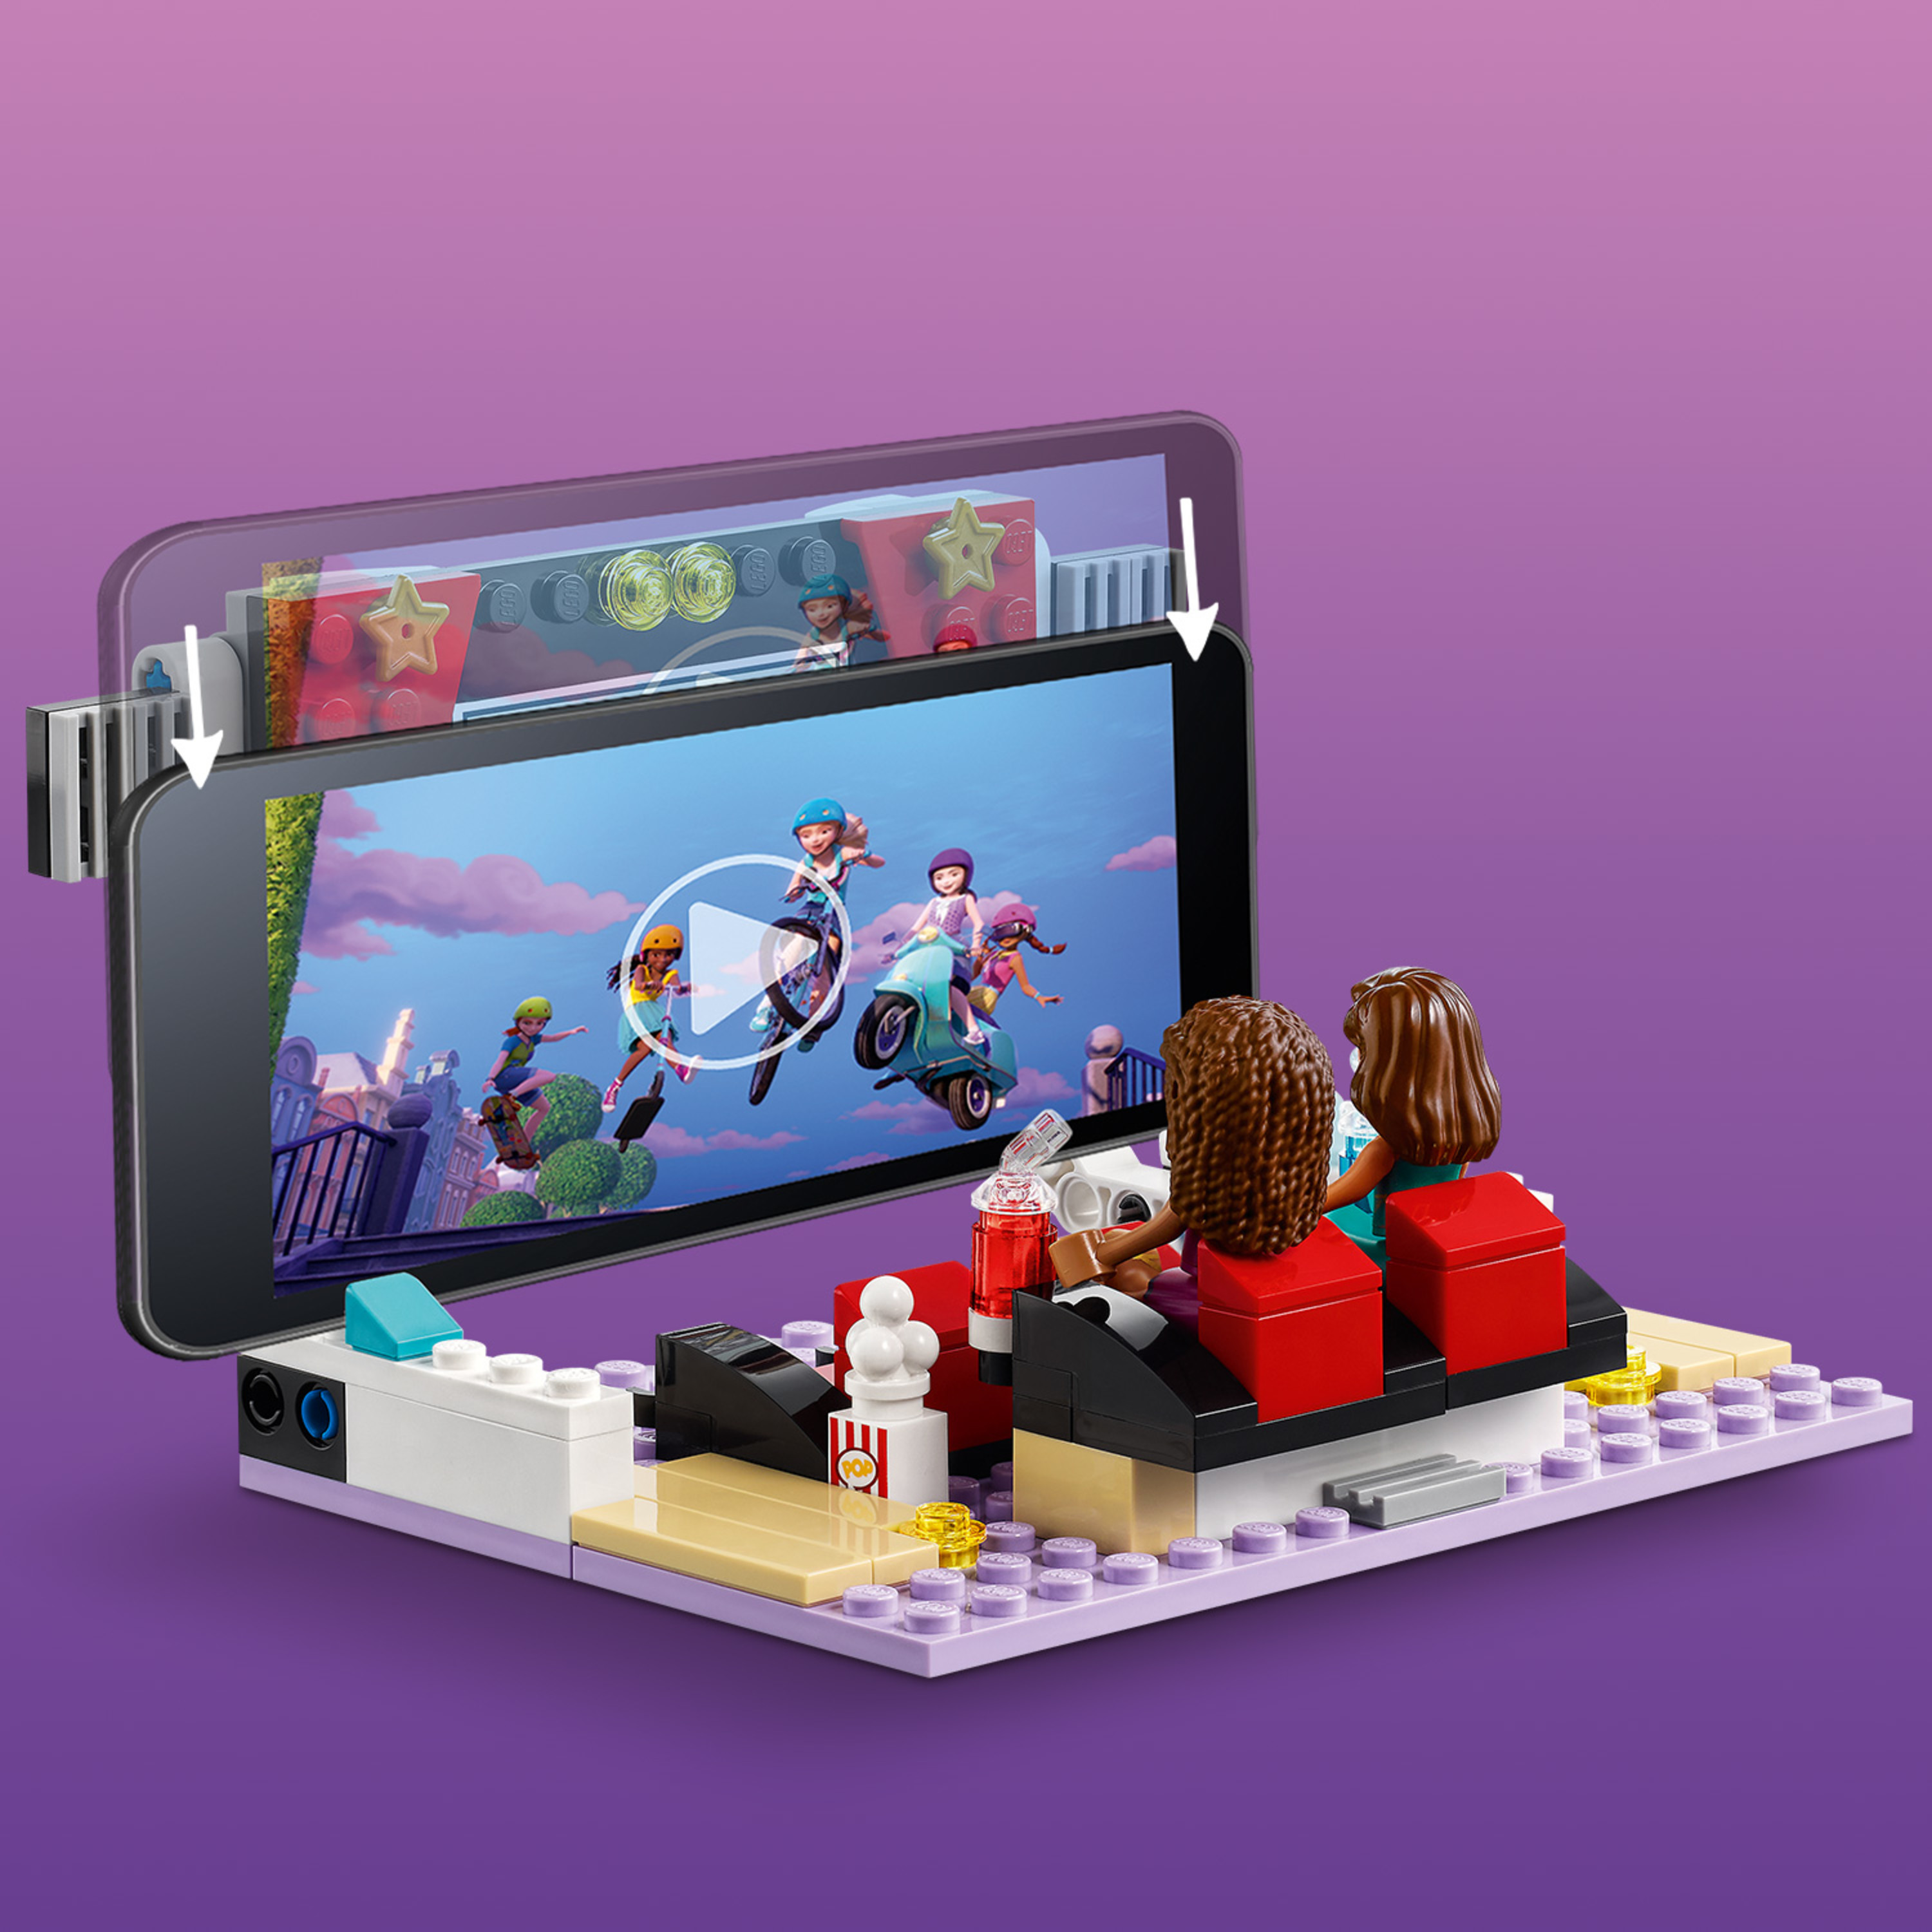 LEGO Friends Heartlake City Movie Theater Set 41448 Building Toy; Great Gift for Kids (451 Pieces) - image 5 of 7